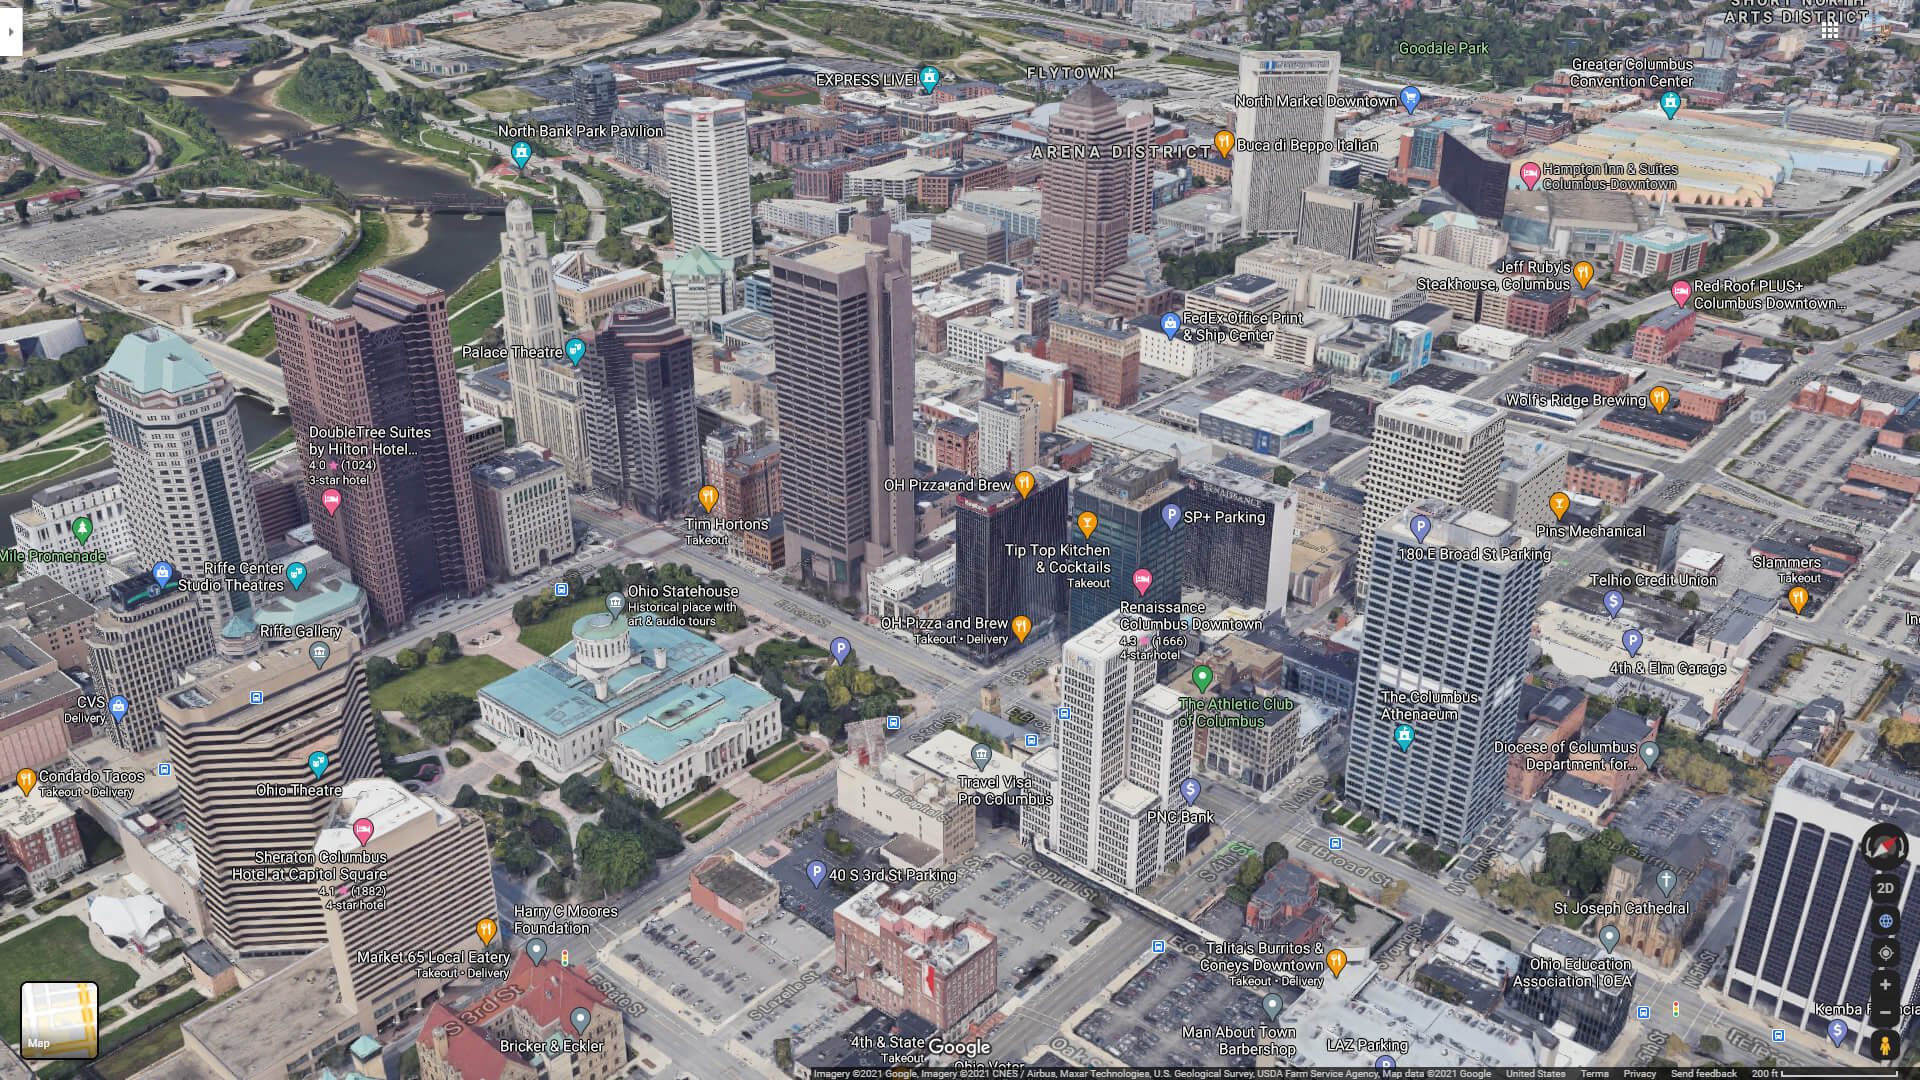 Rendered image of the Ohio Statehouse in Columbus